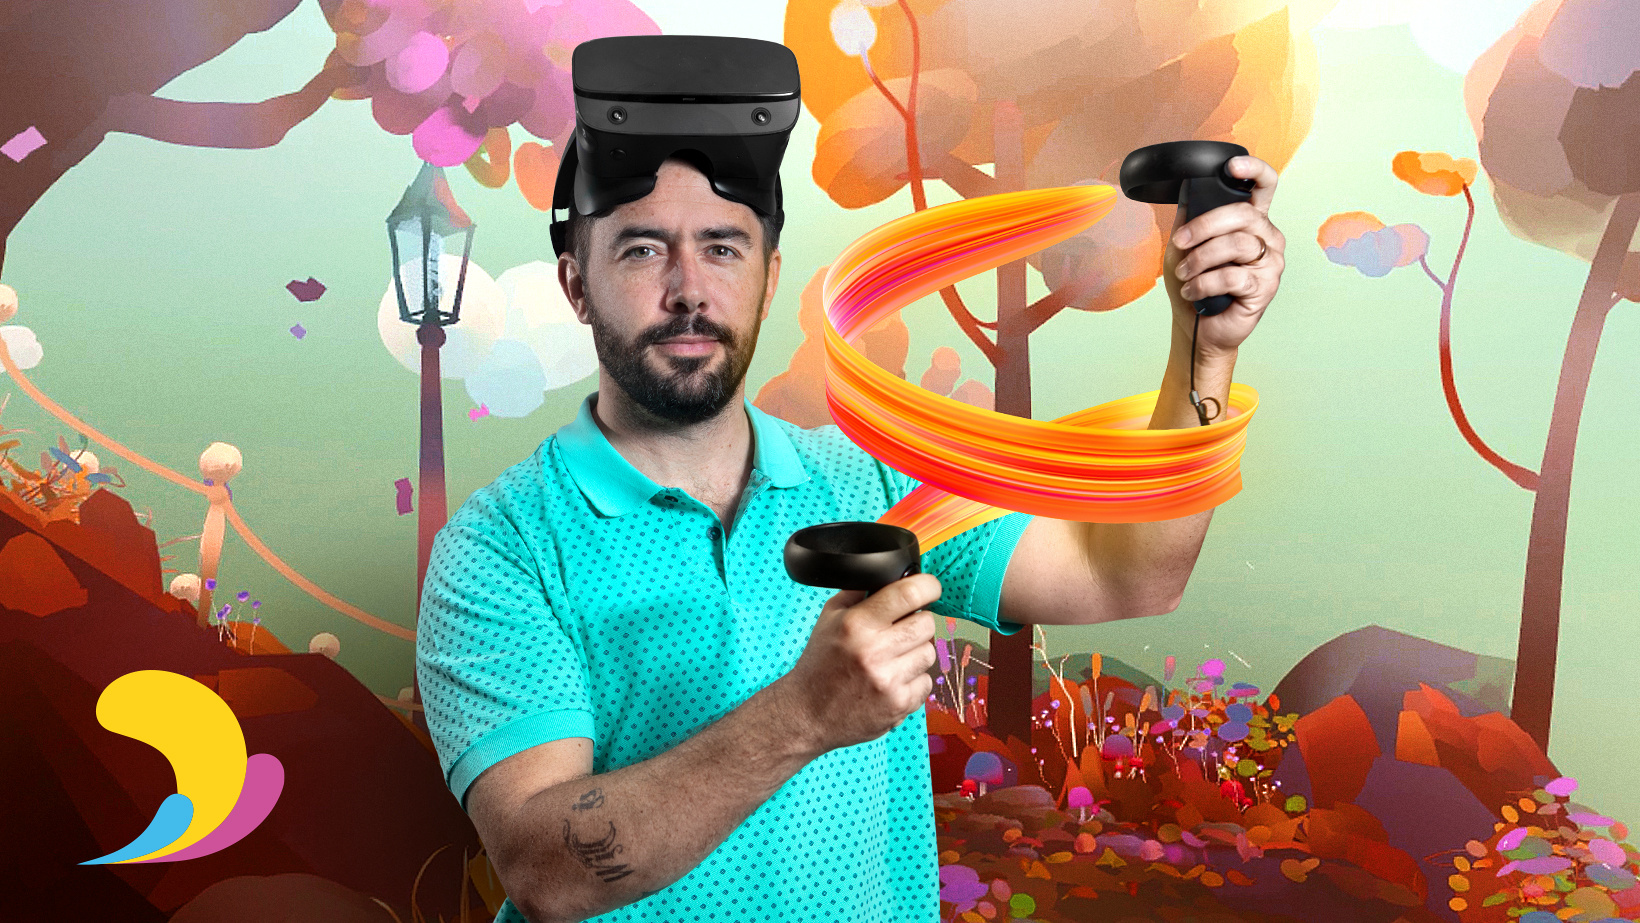 Online Course - VR Animation with Quill (Federico Moreno Breser) | Domestika